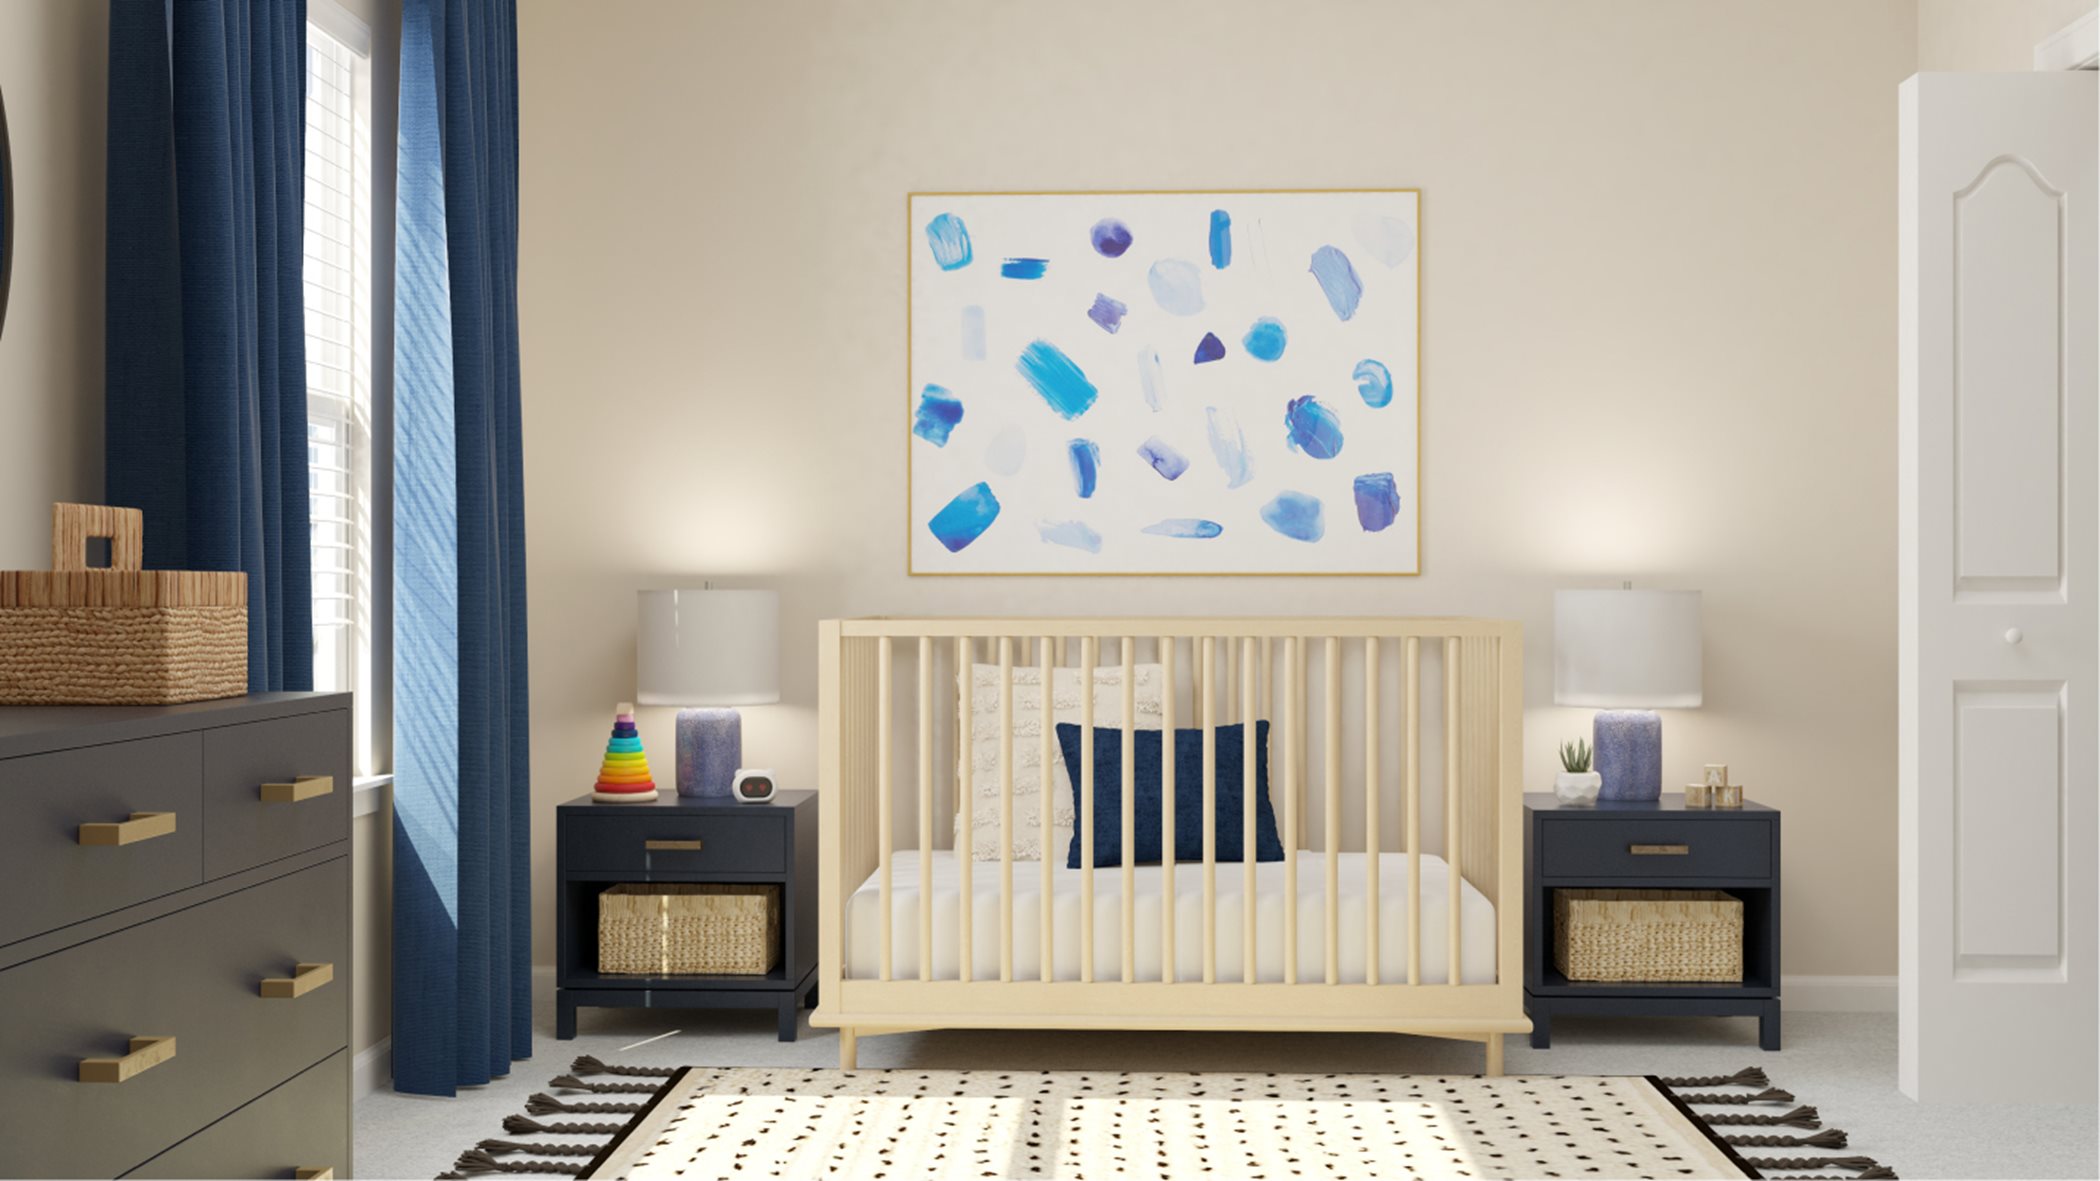 Live-work-learn bedroom 2 with crib